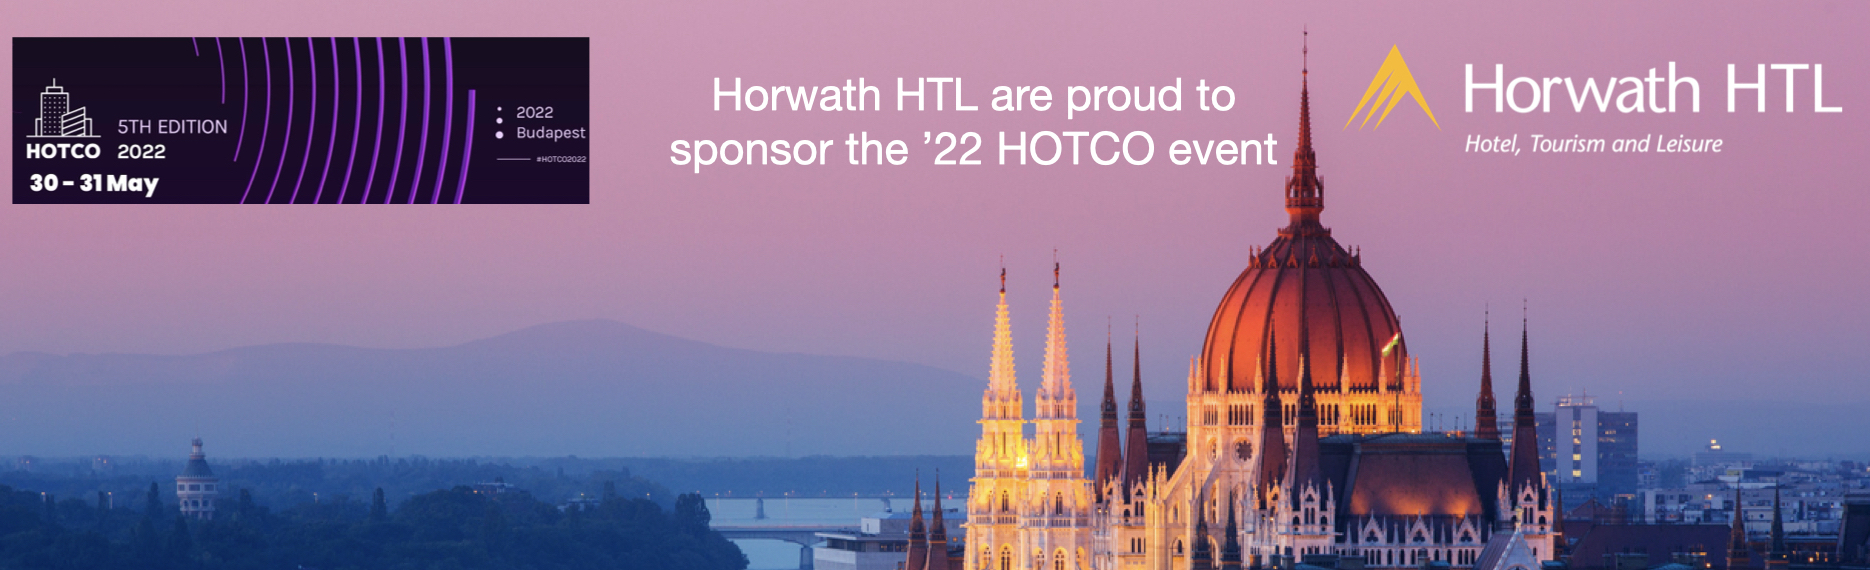 Horwath HTL Sponsor the 2022 HOTCO Hotel Investment Conference